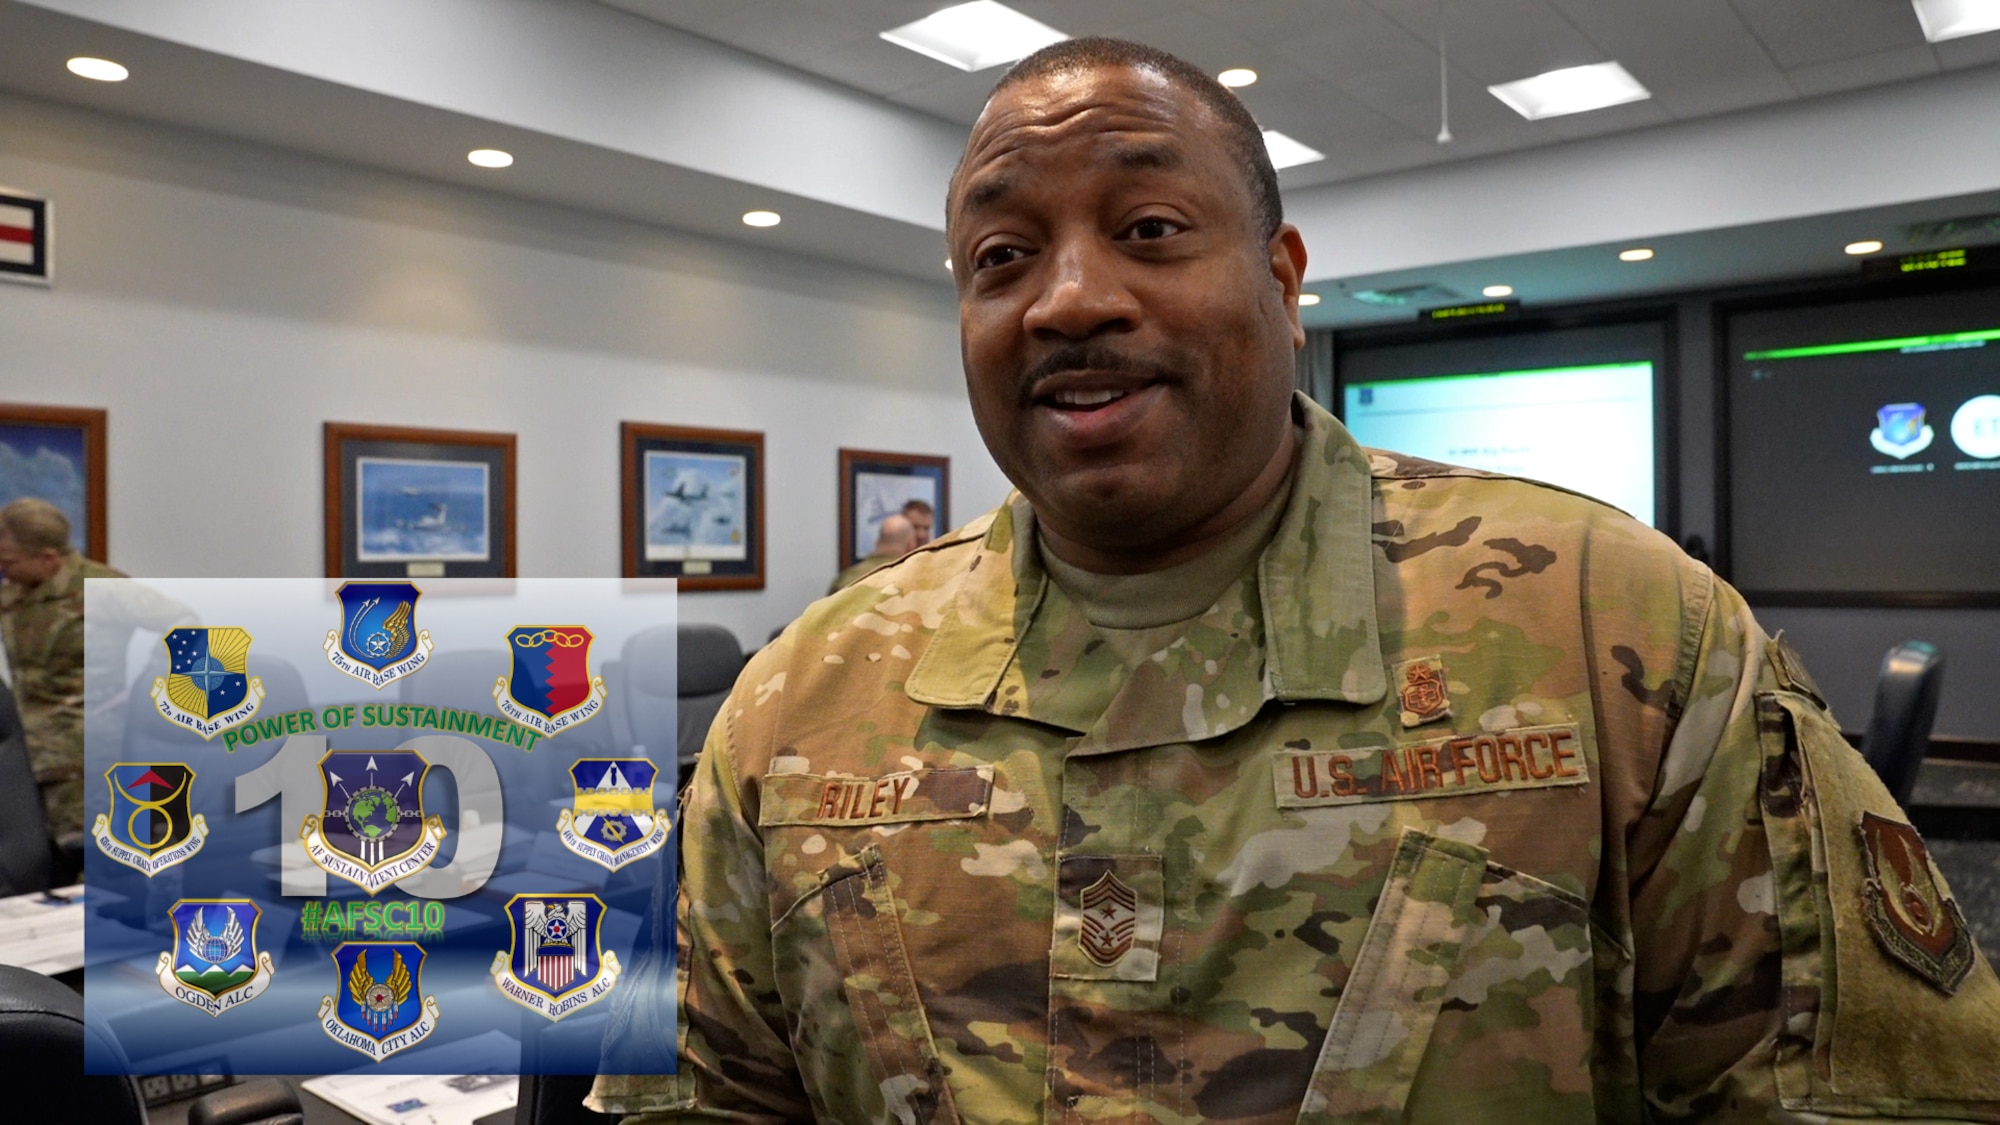 During the AFSC Commander's Summit, April 12 and 13, 2022 at Tinker Air Force Base, leaders like Chief Master Sgt. Raymond Riley, Jr., command chief, 75th Air Base Wing, gave their thoughts about the growth of the Sustainment Center throughout the last 10 years.